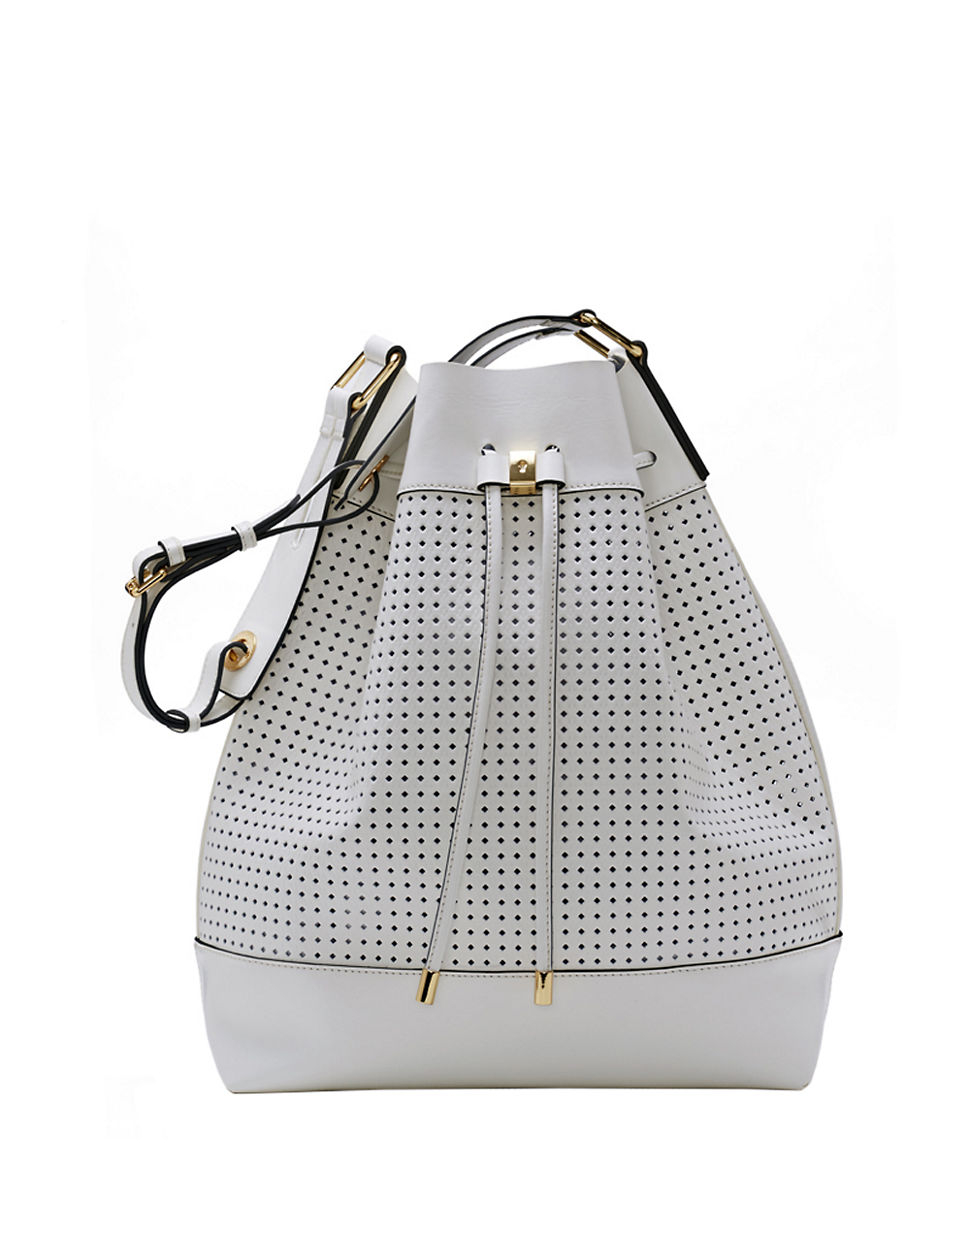 Vince Camuto Colby Perforated Leather Drawstring Bag in White | Lyst